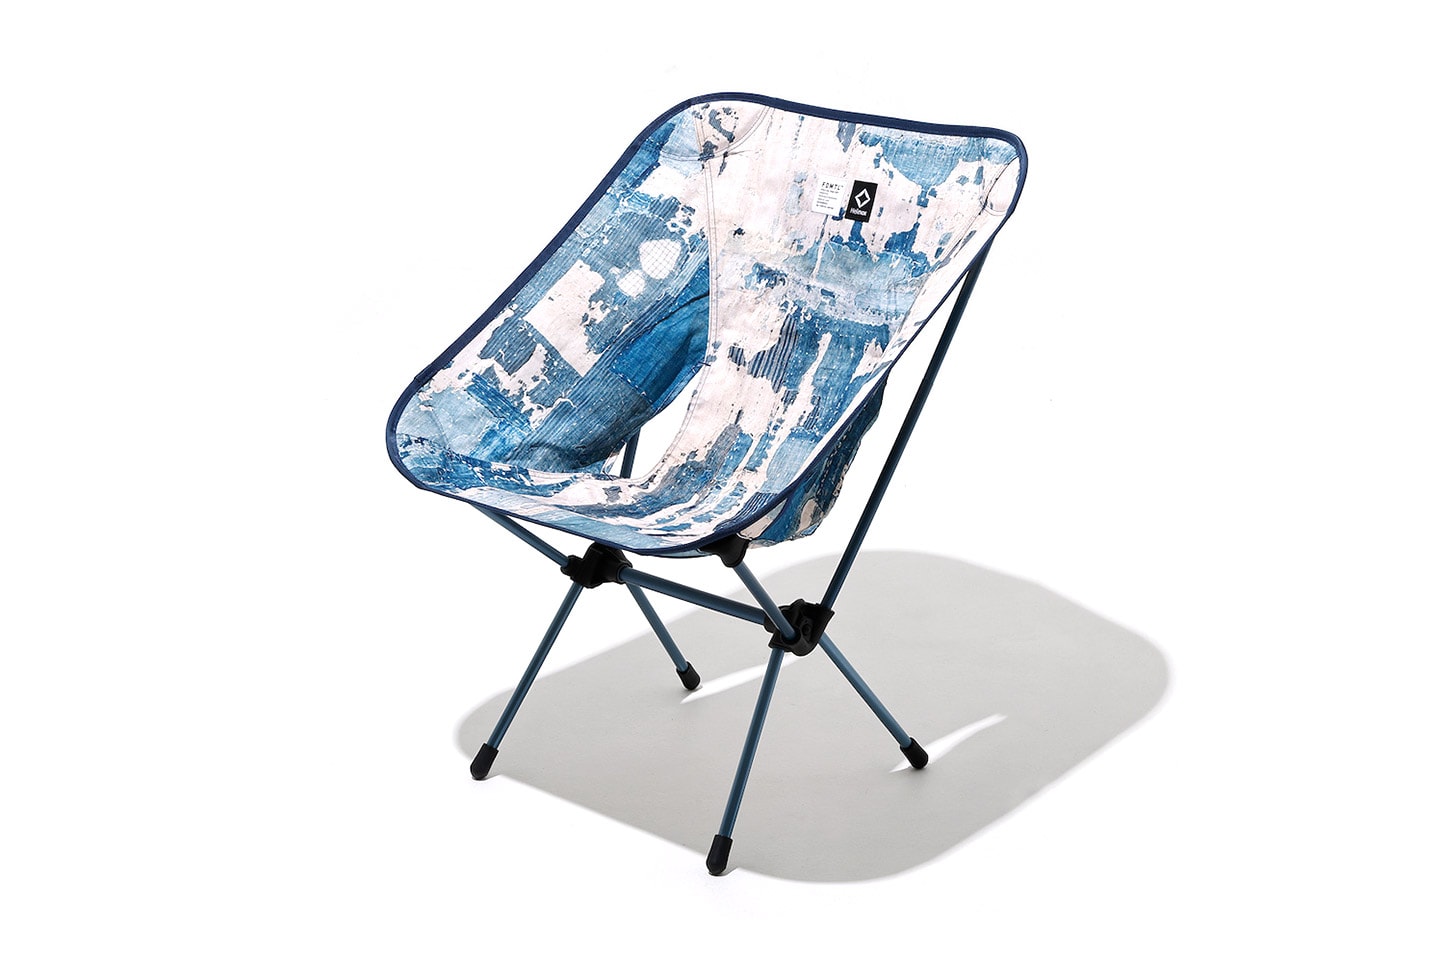 FDMTL x Helinox Heimplanet boro collection Japan camping GoOut tech chairs outdoors camping 